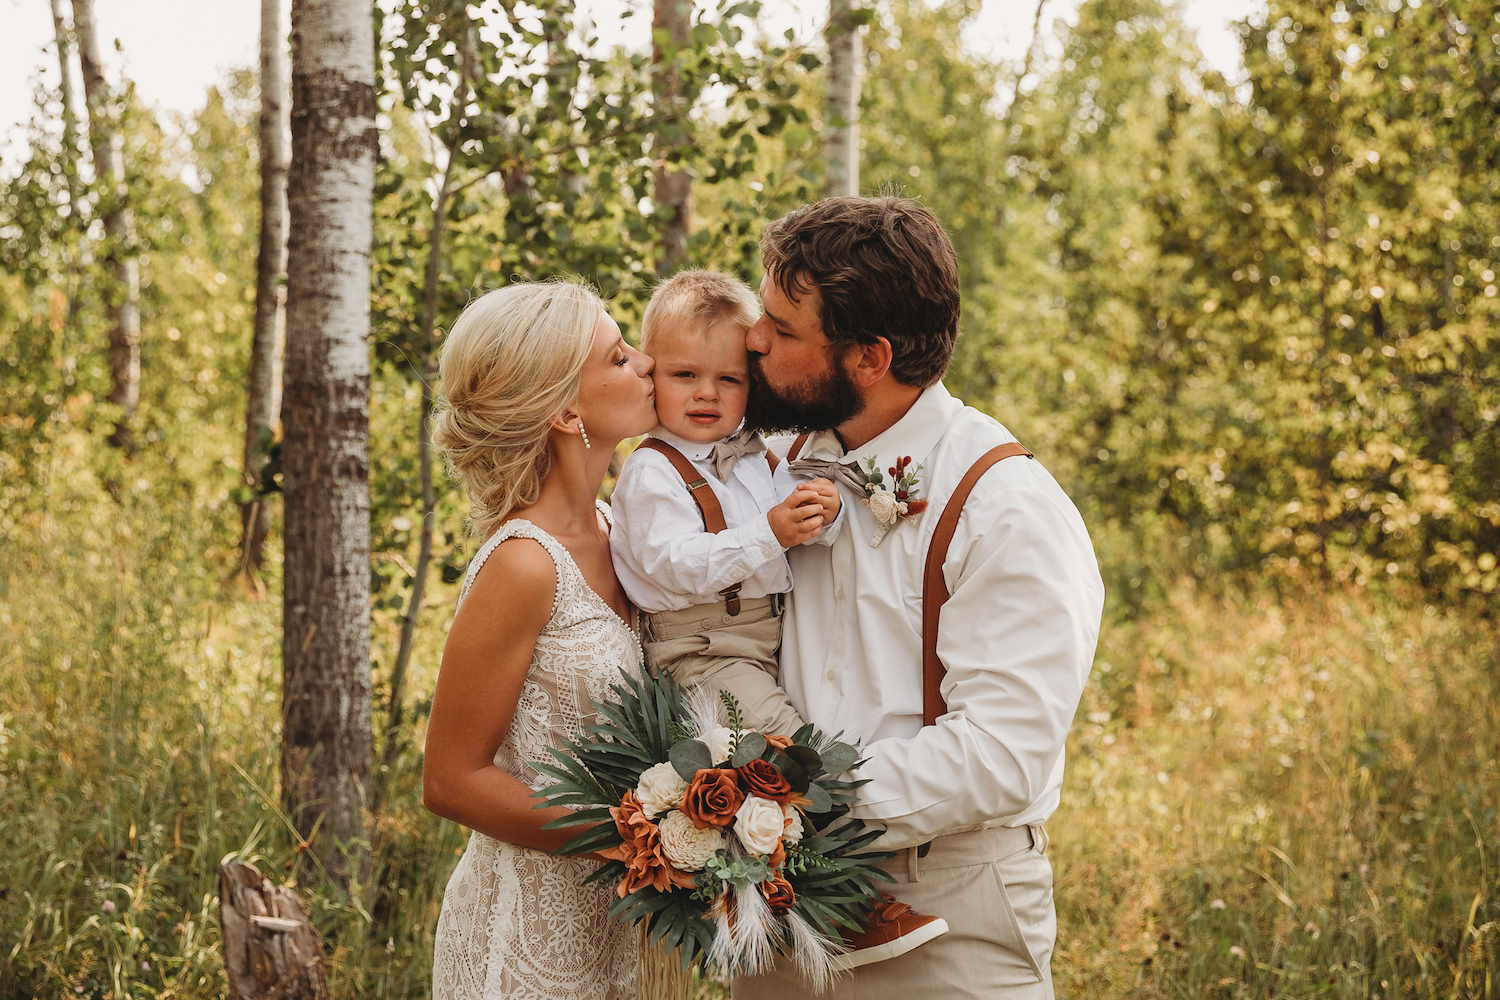 Rylie on the left kissing her son Knox's cheek with her husband, Aaron, kissing Knox's cheek on the right on their wedding day.